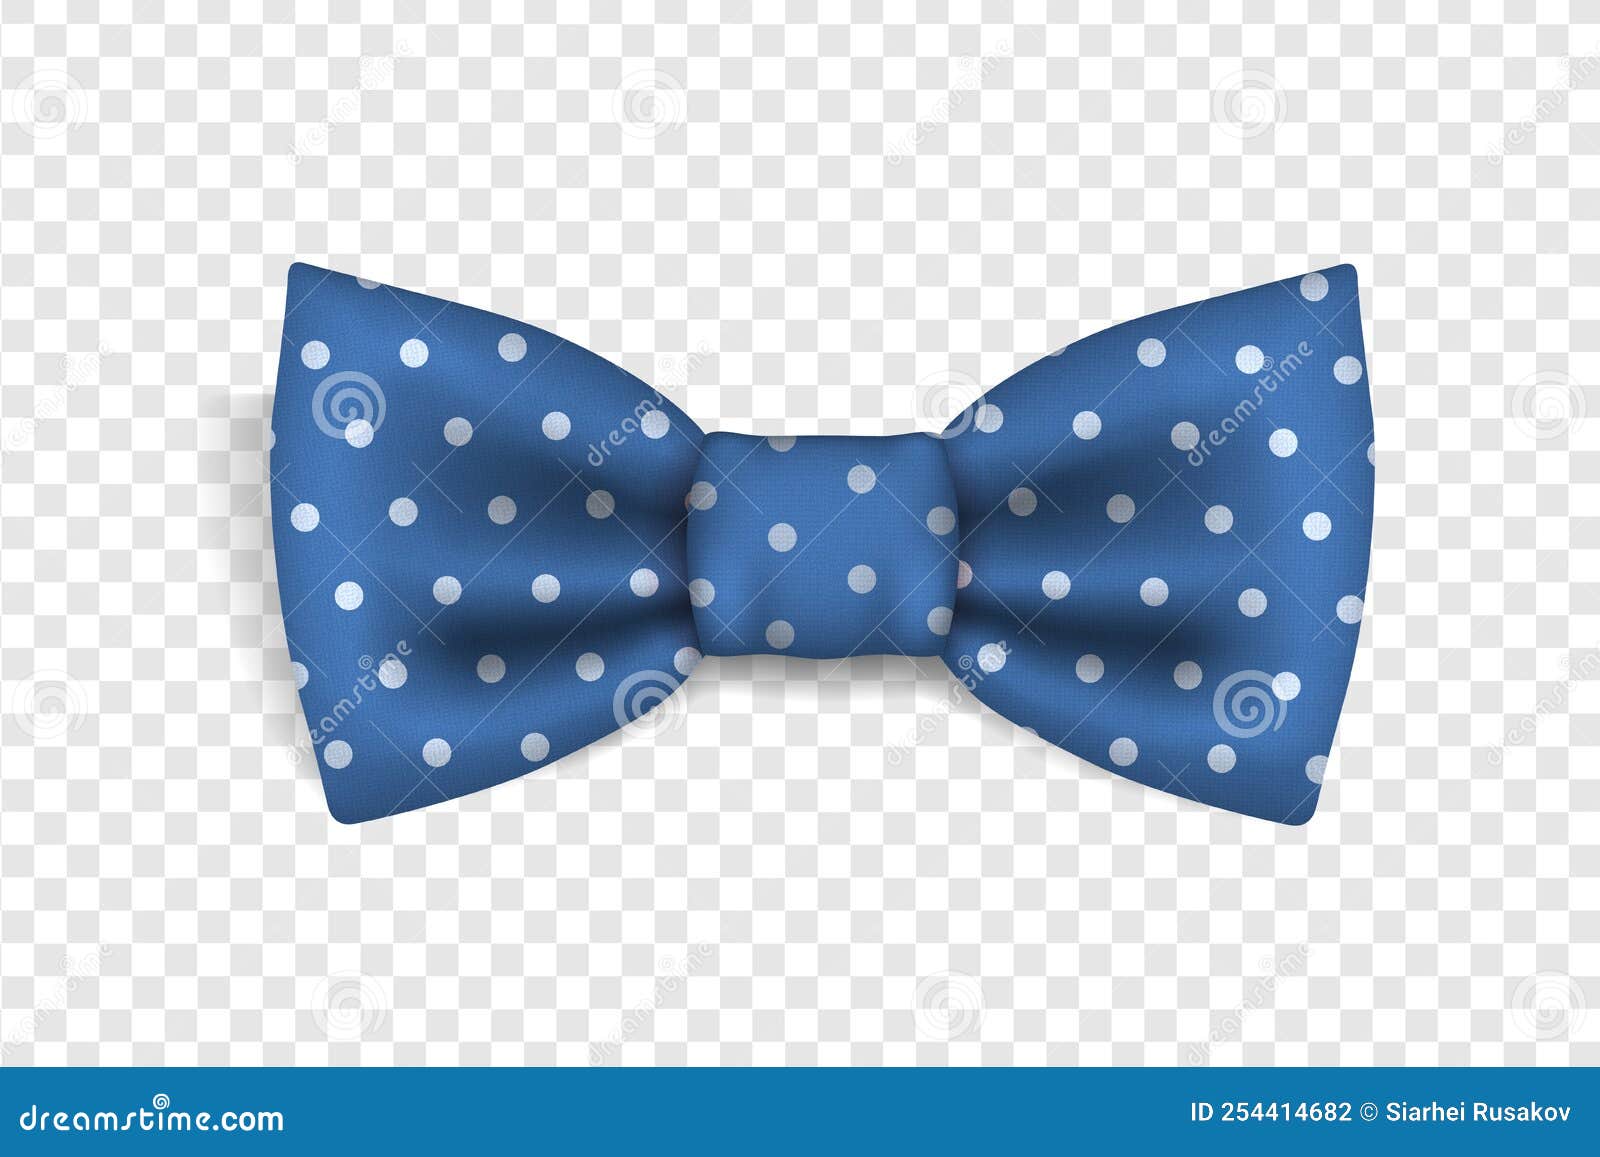 Vector Icon of a Blue Polka Dot Bow Tie Highlighted on a Transparent ...